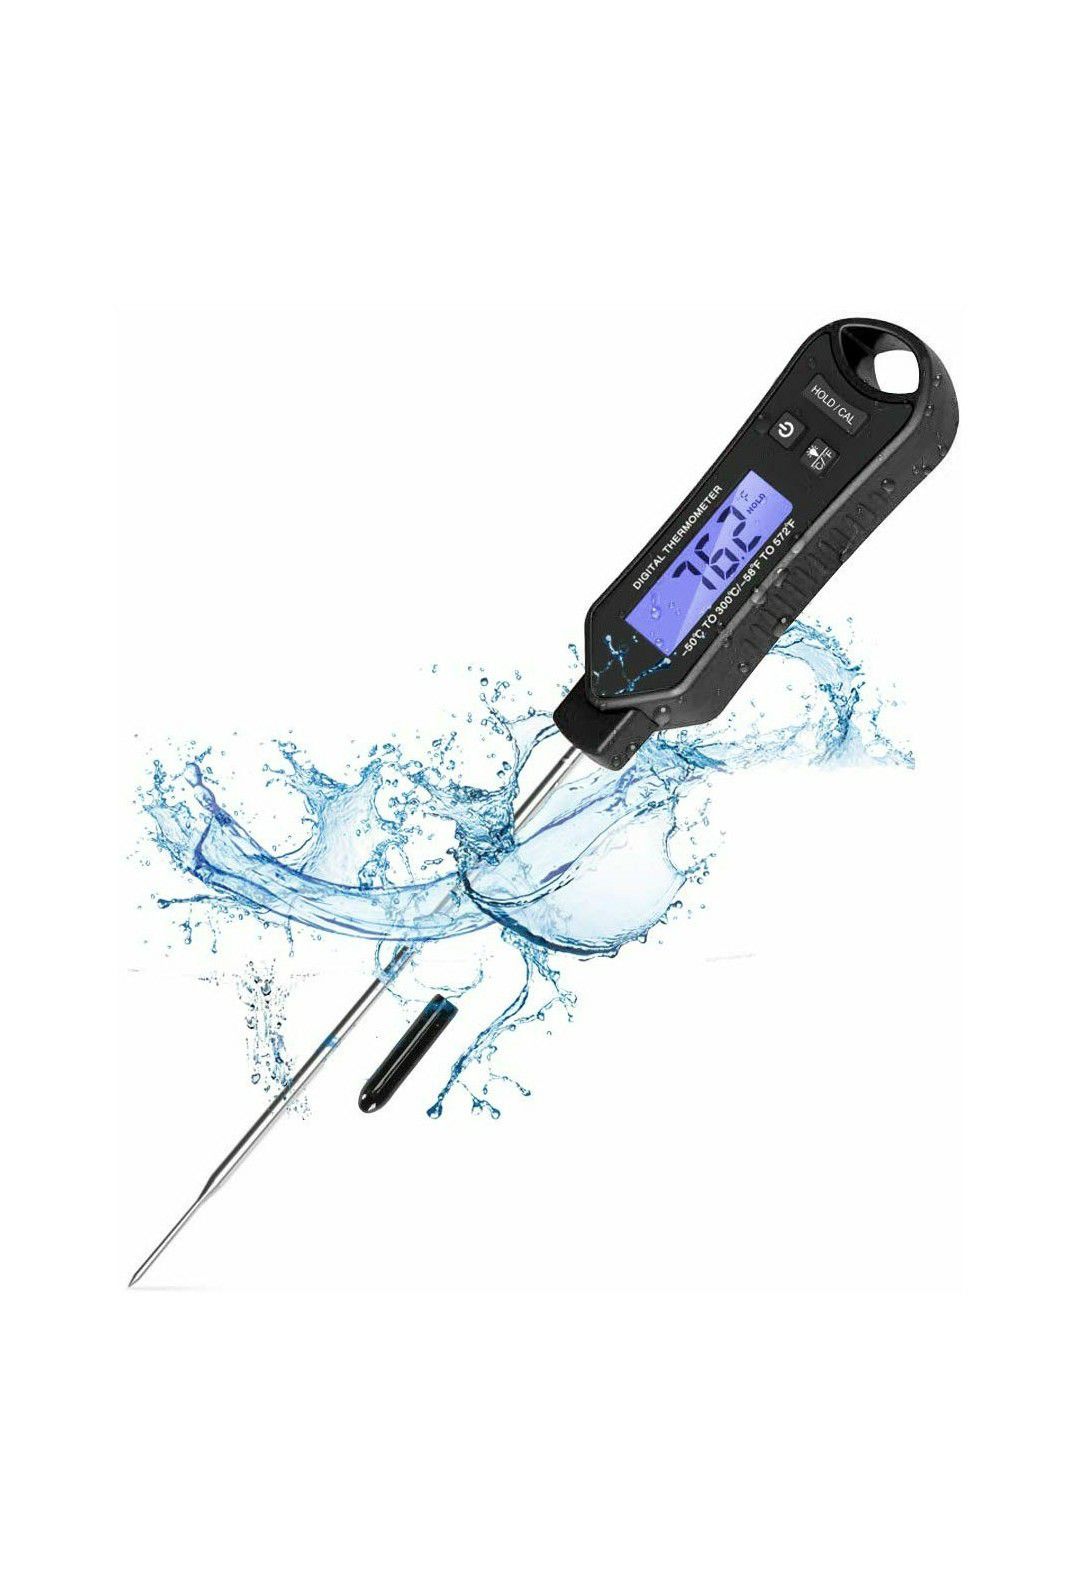 (J18) Waterproof Digital Instant Read Meat Thermometer with Long Probe for Grilling Smoker BBQ Cooking Kitchen Food Candy Milk Yogurt Temperature